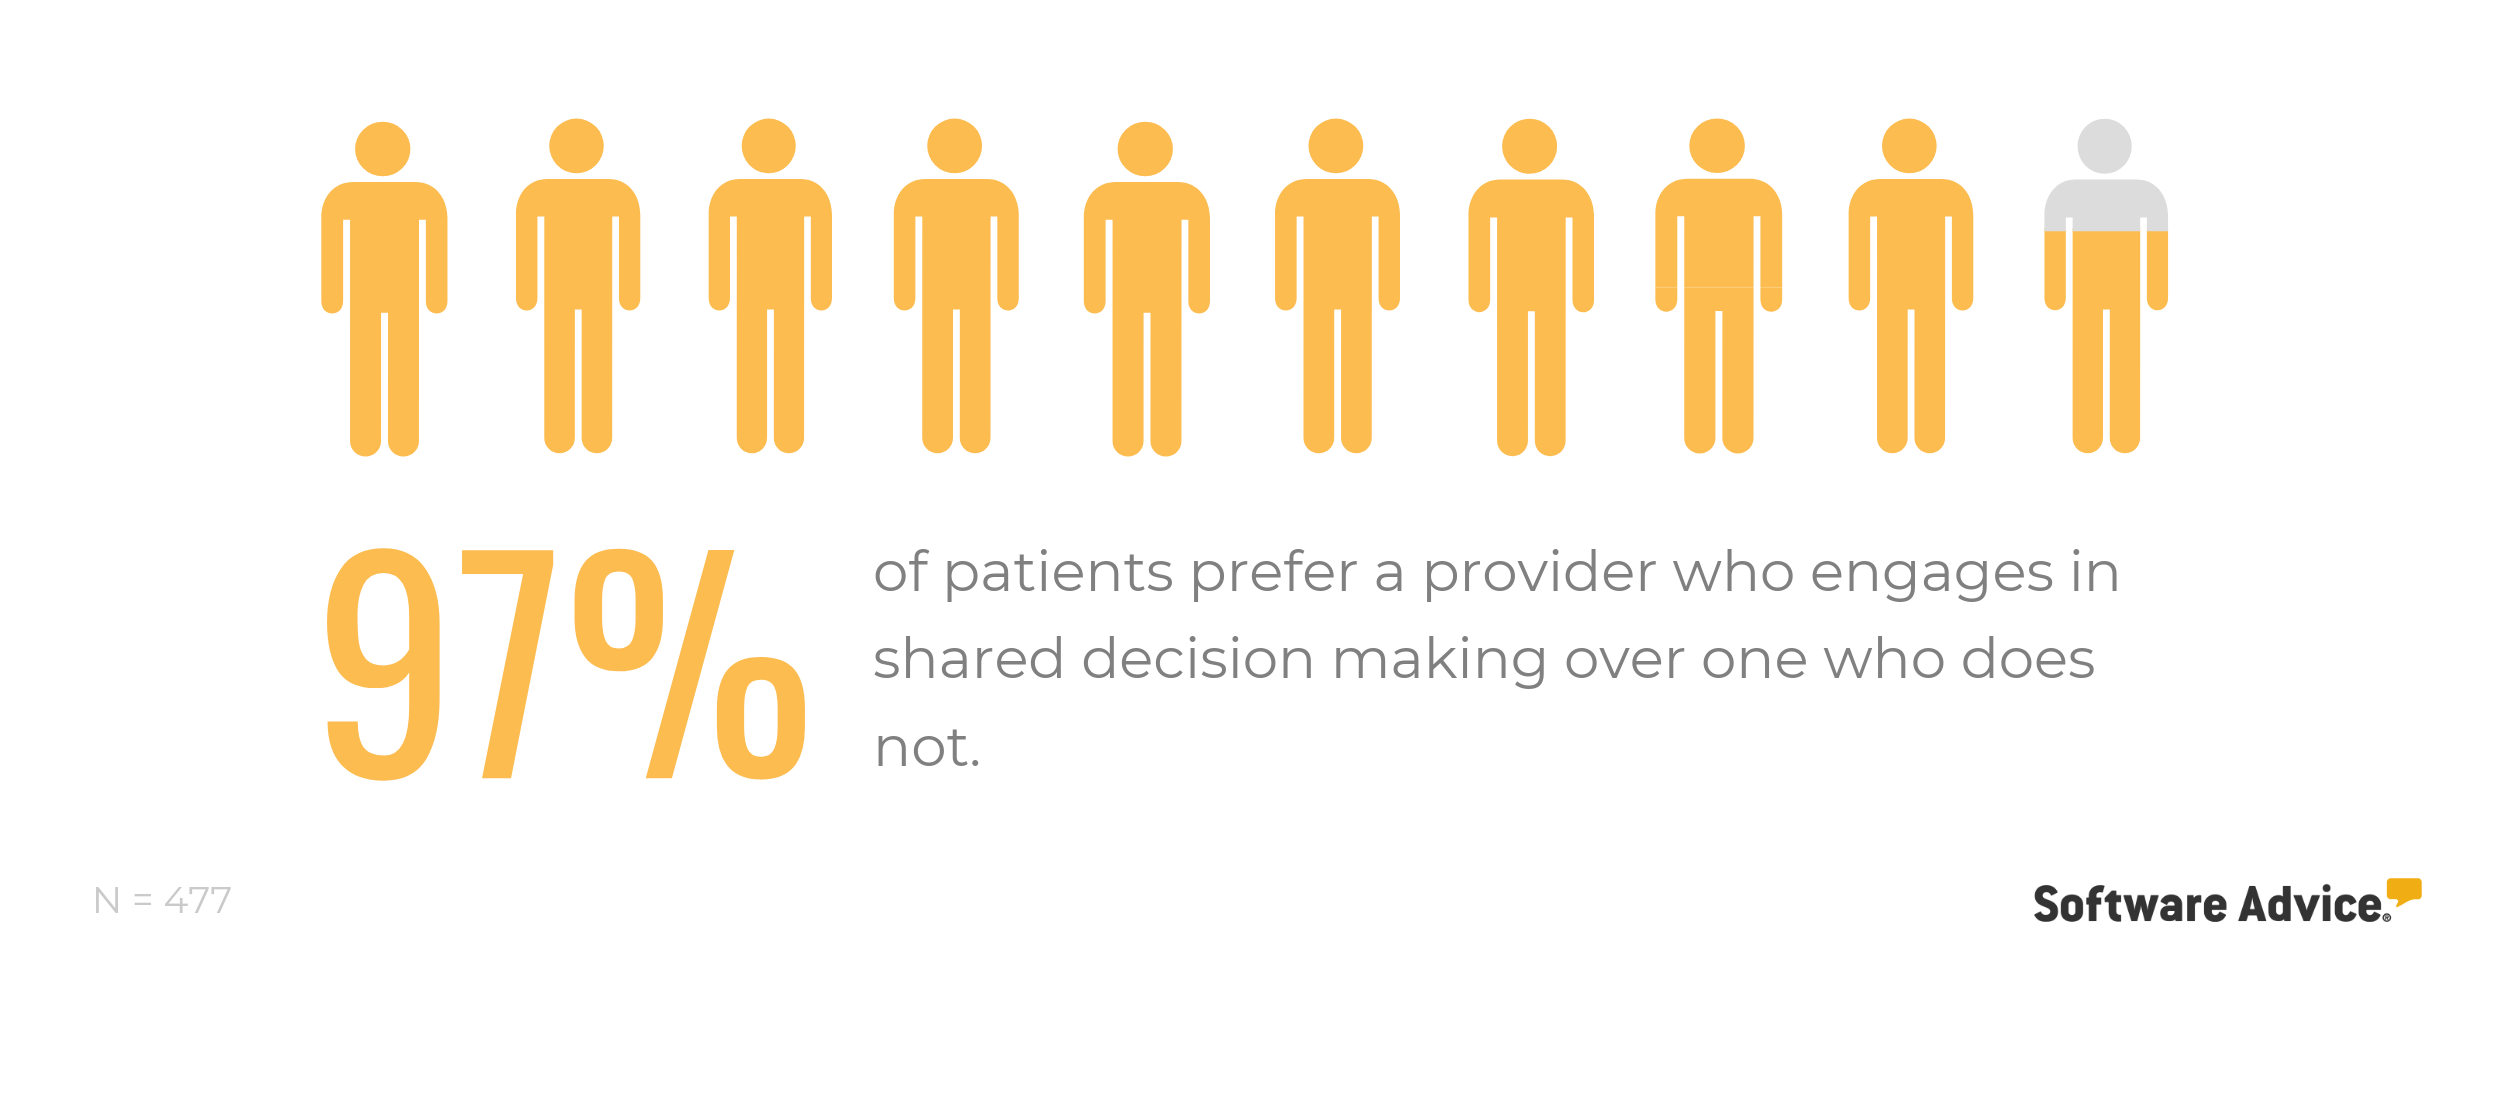 Software-Advice:-Patient-preference-for-physicians-who-engage-in-shared-decision-making